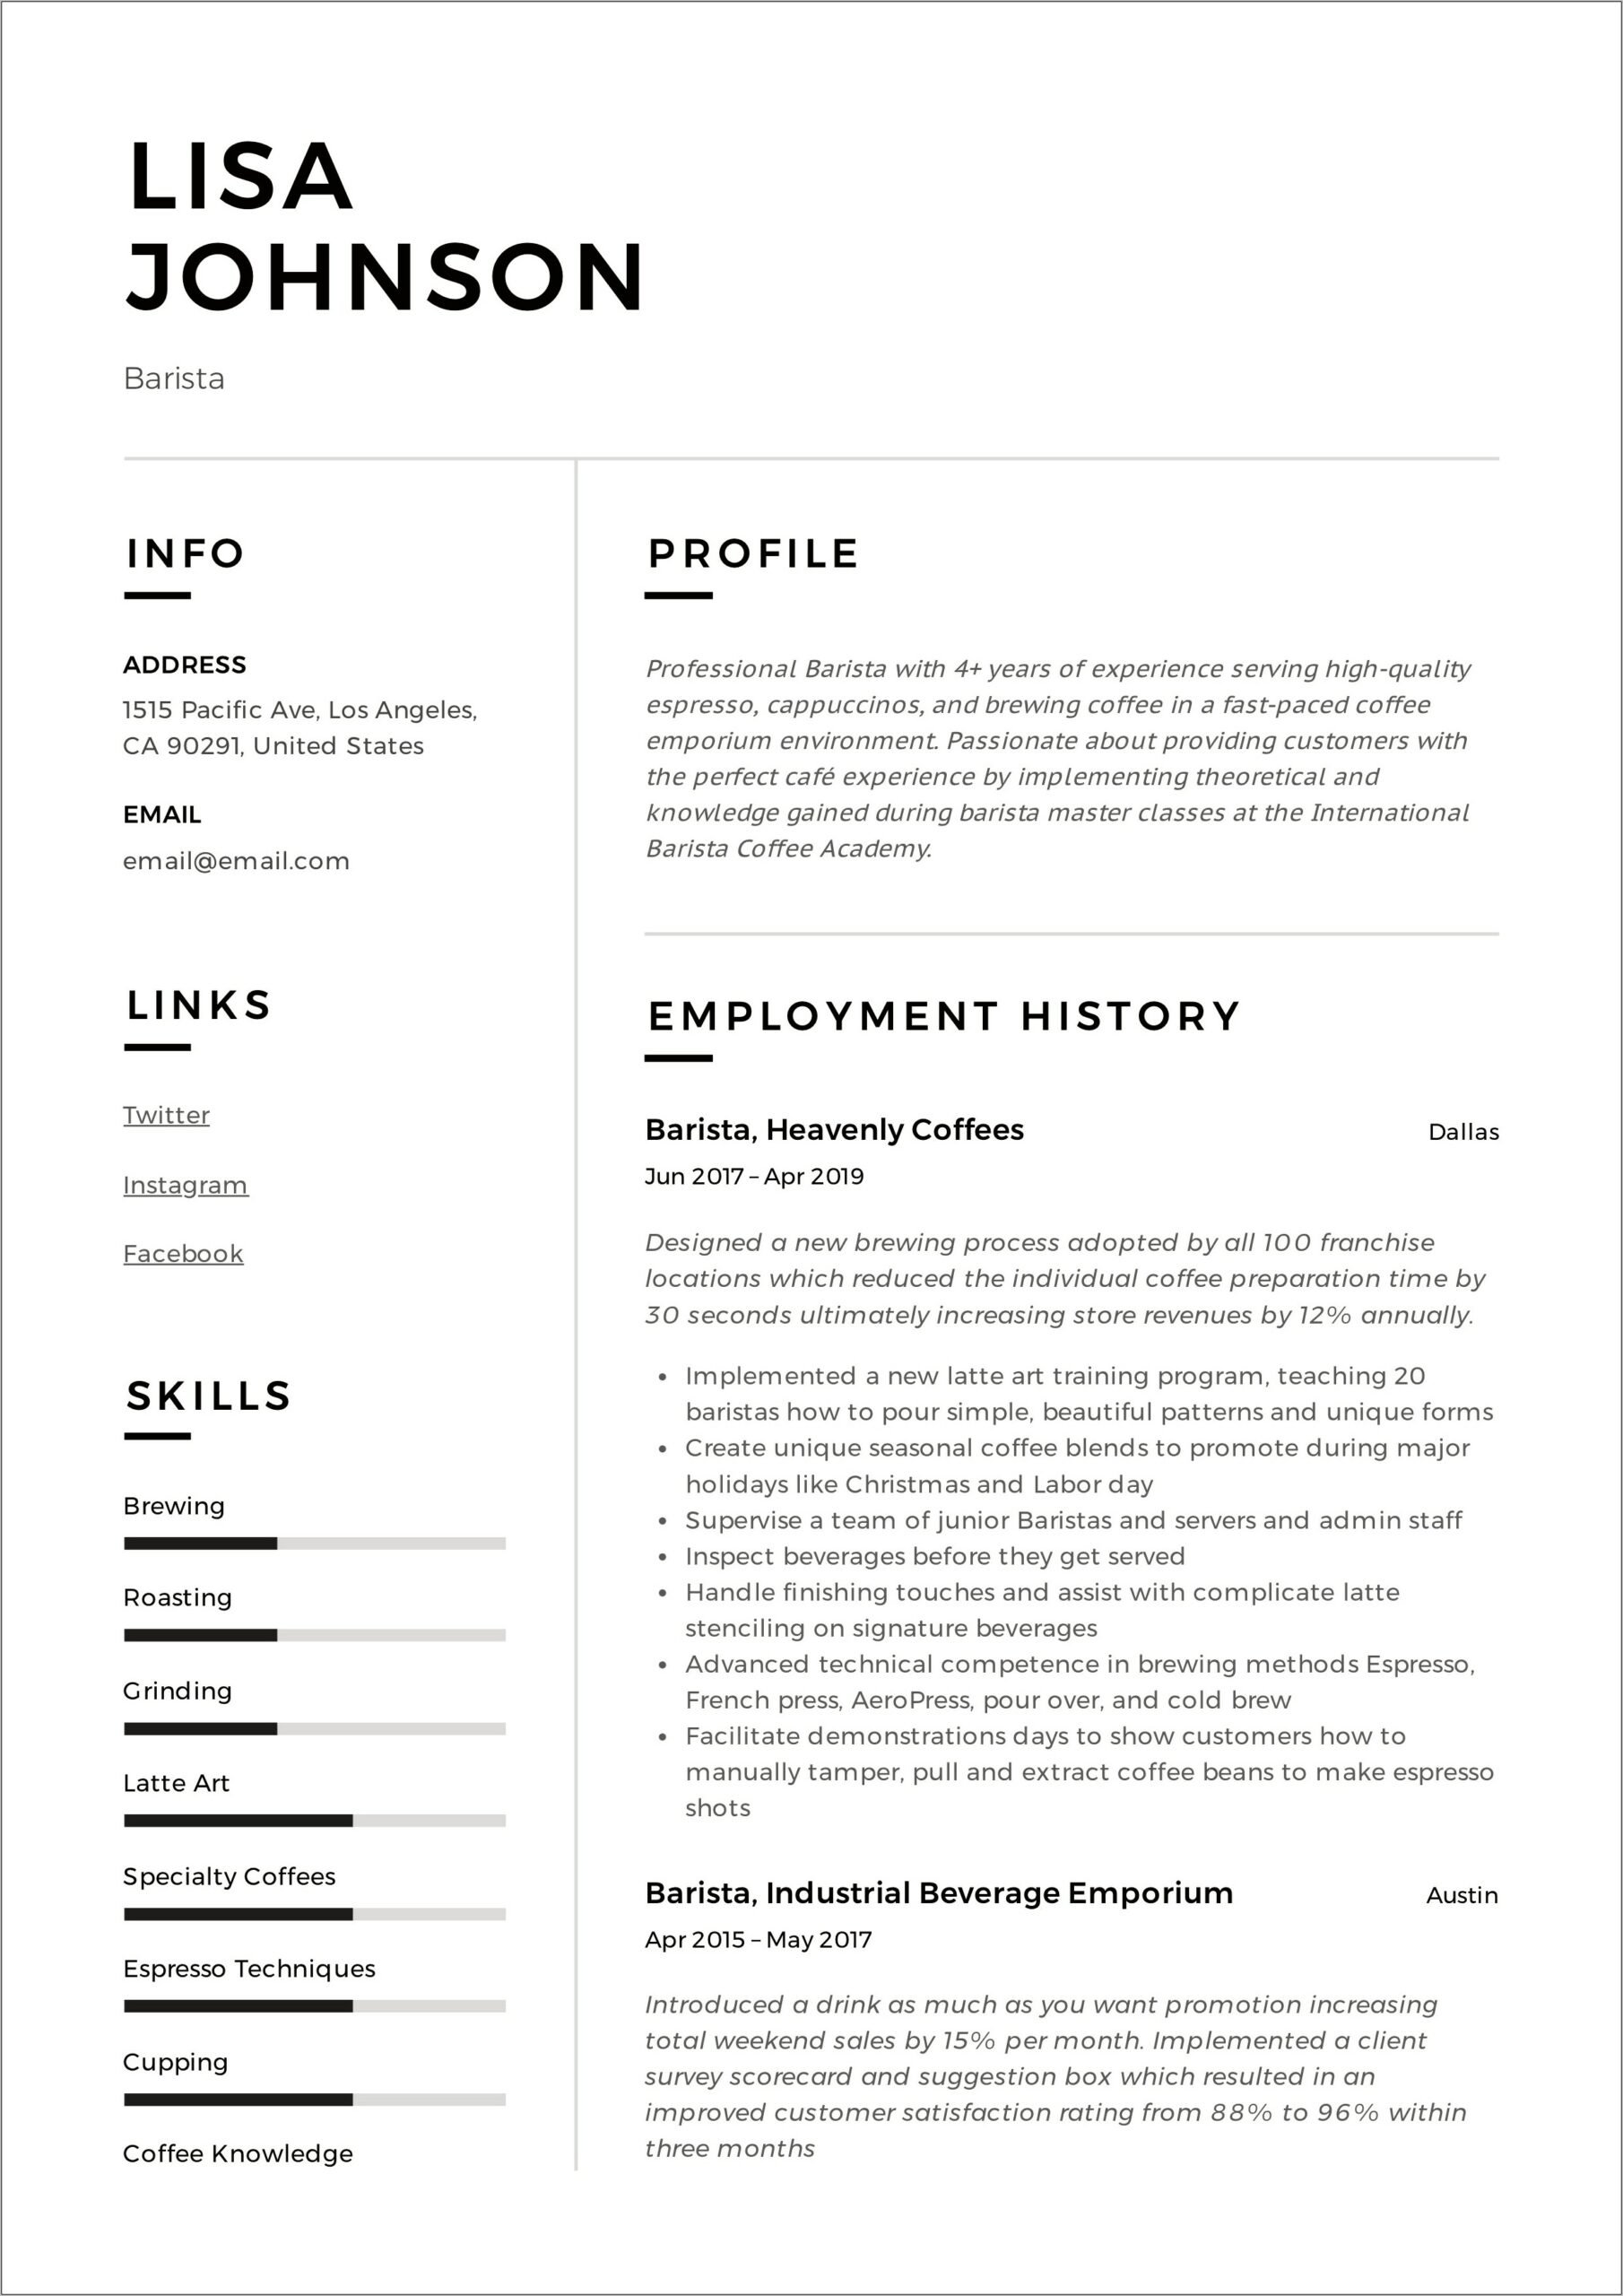 Resume Sample For Barista With No Experience